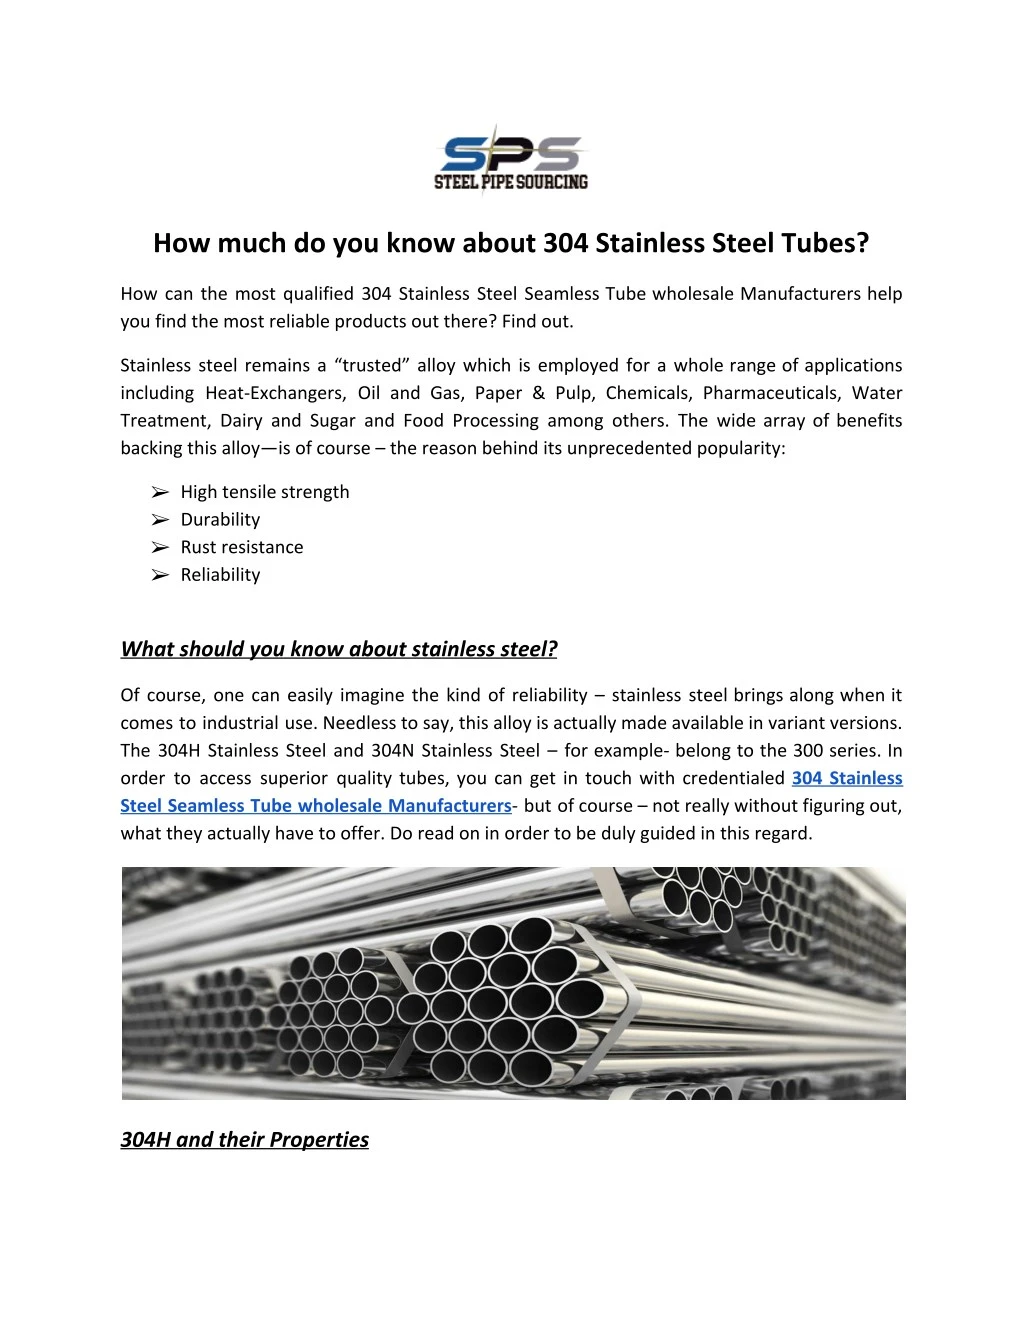 how much do you know about 304 stainless steel